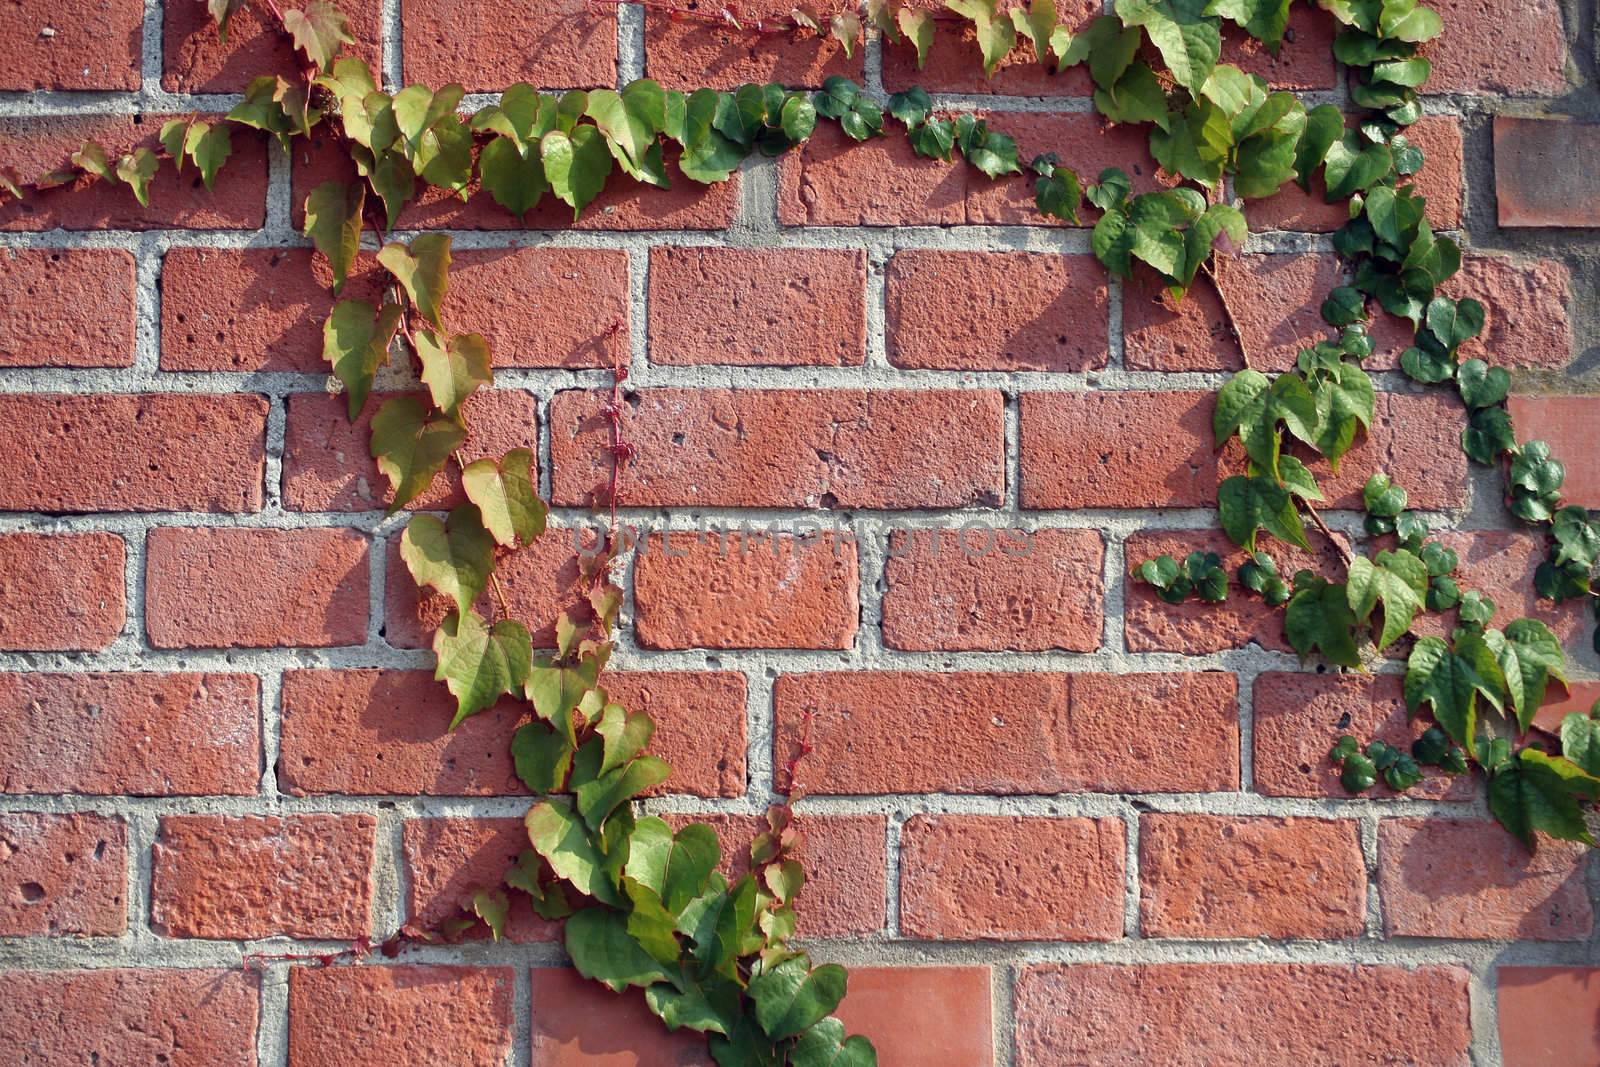 Ivy clinging on a red bricked wall.